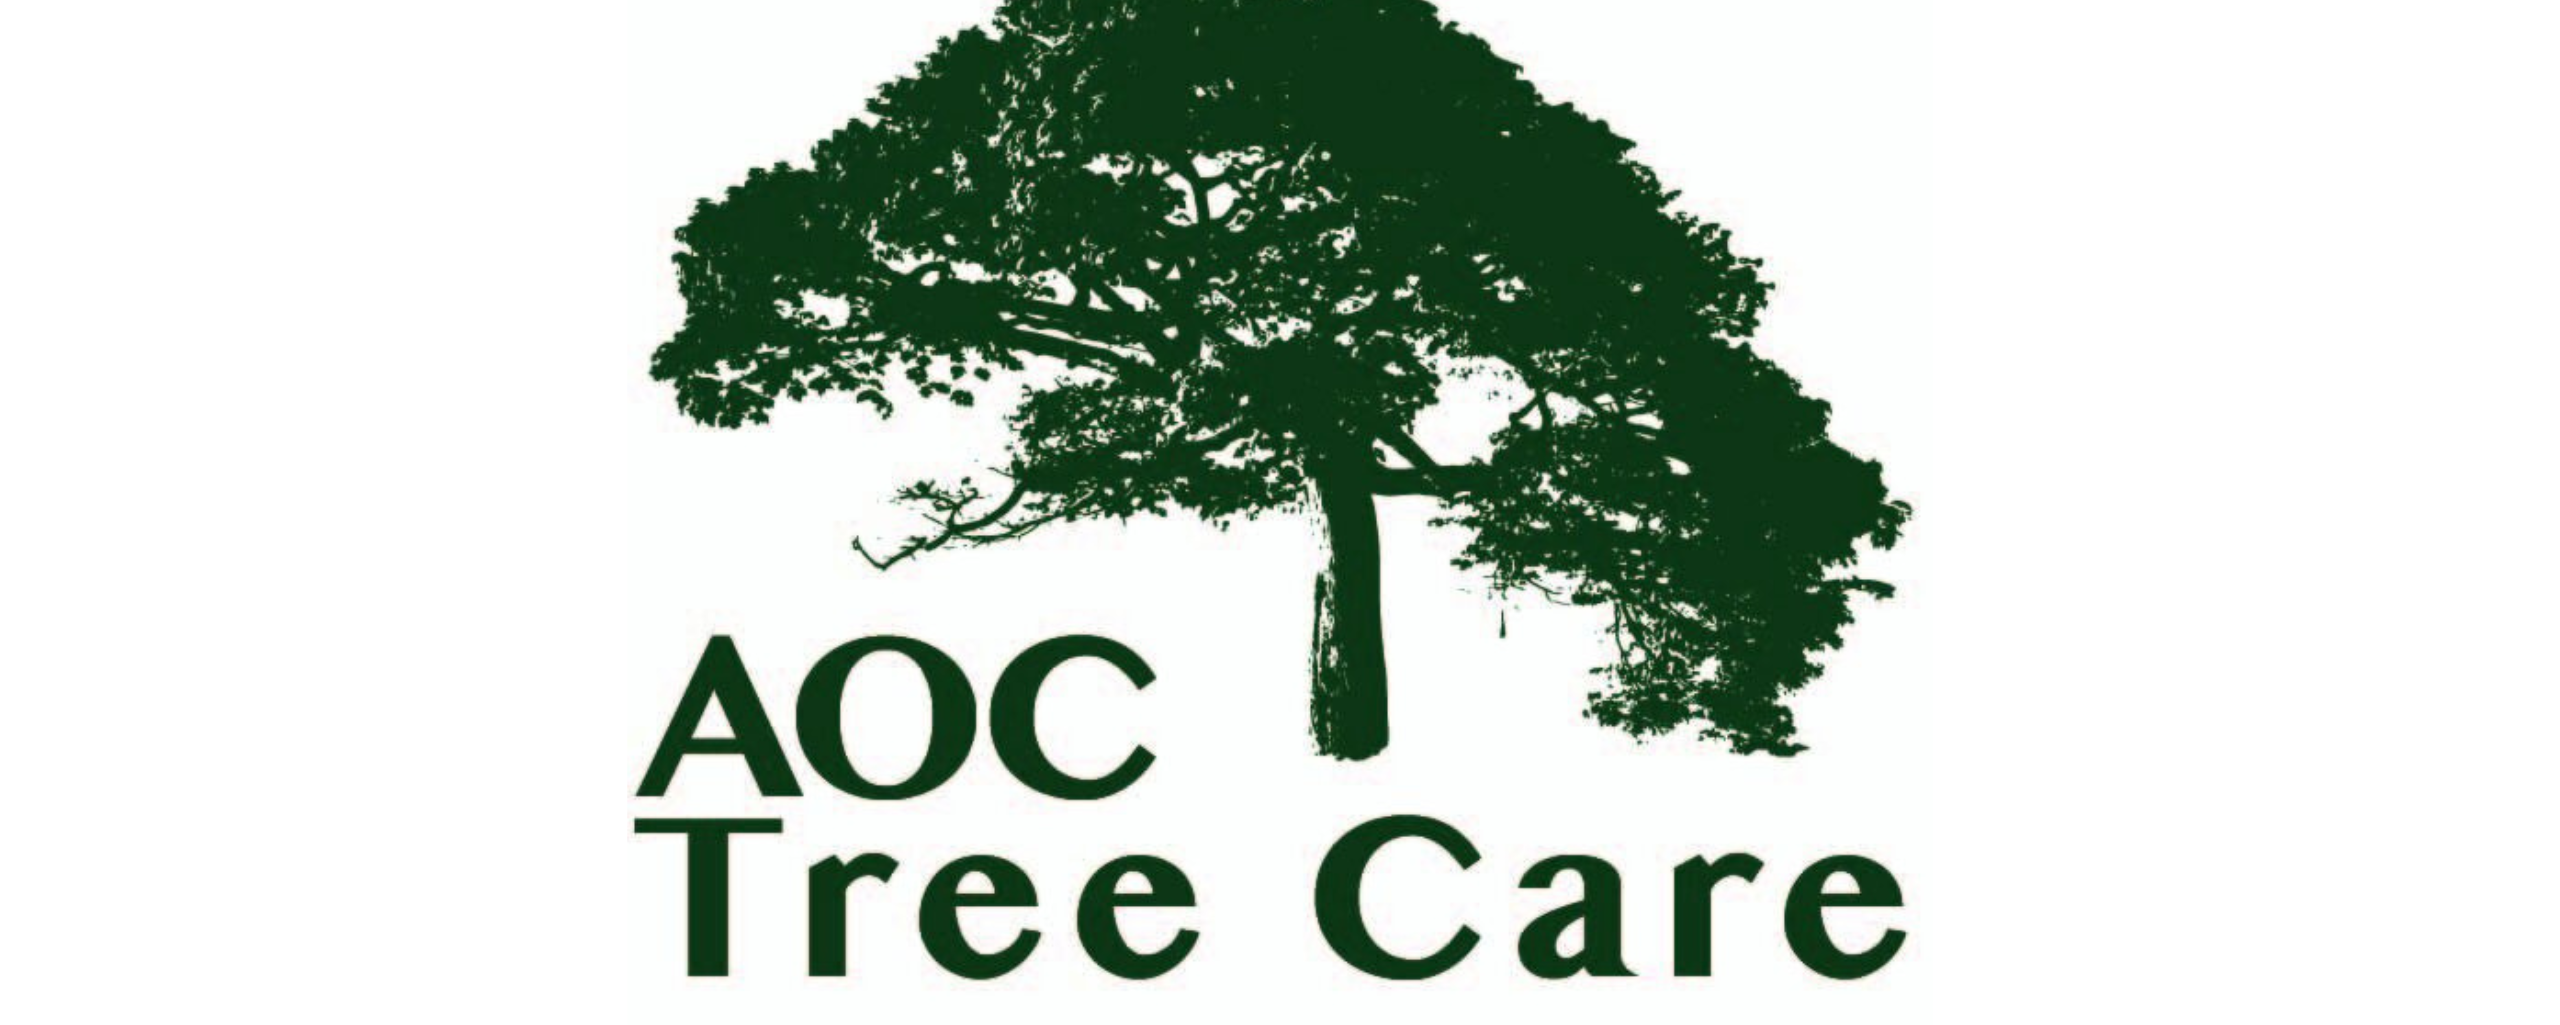 AOC Tree Care - Trusted by 2560 x 1025